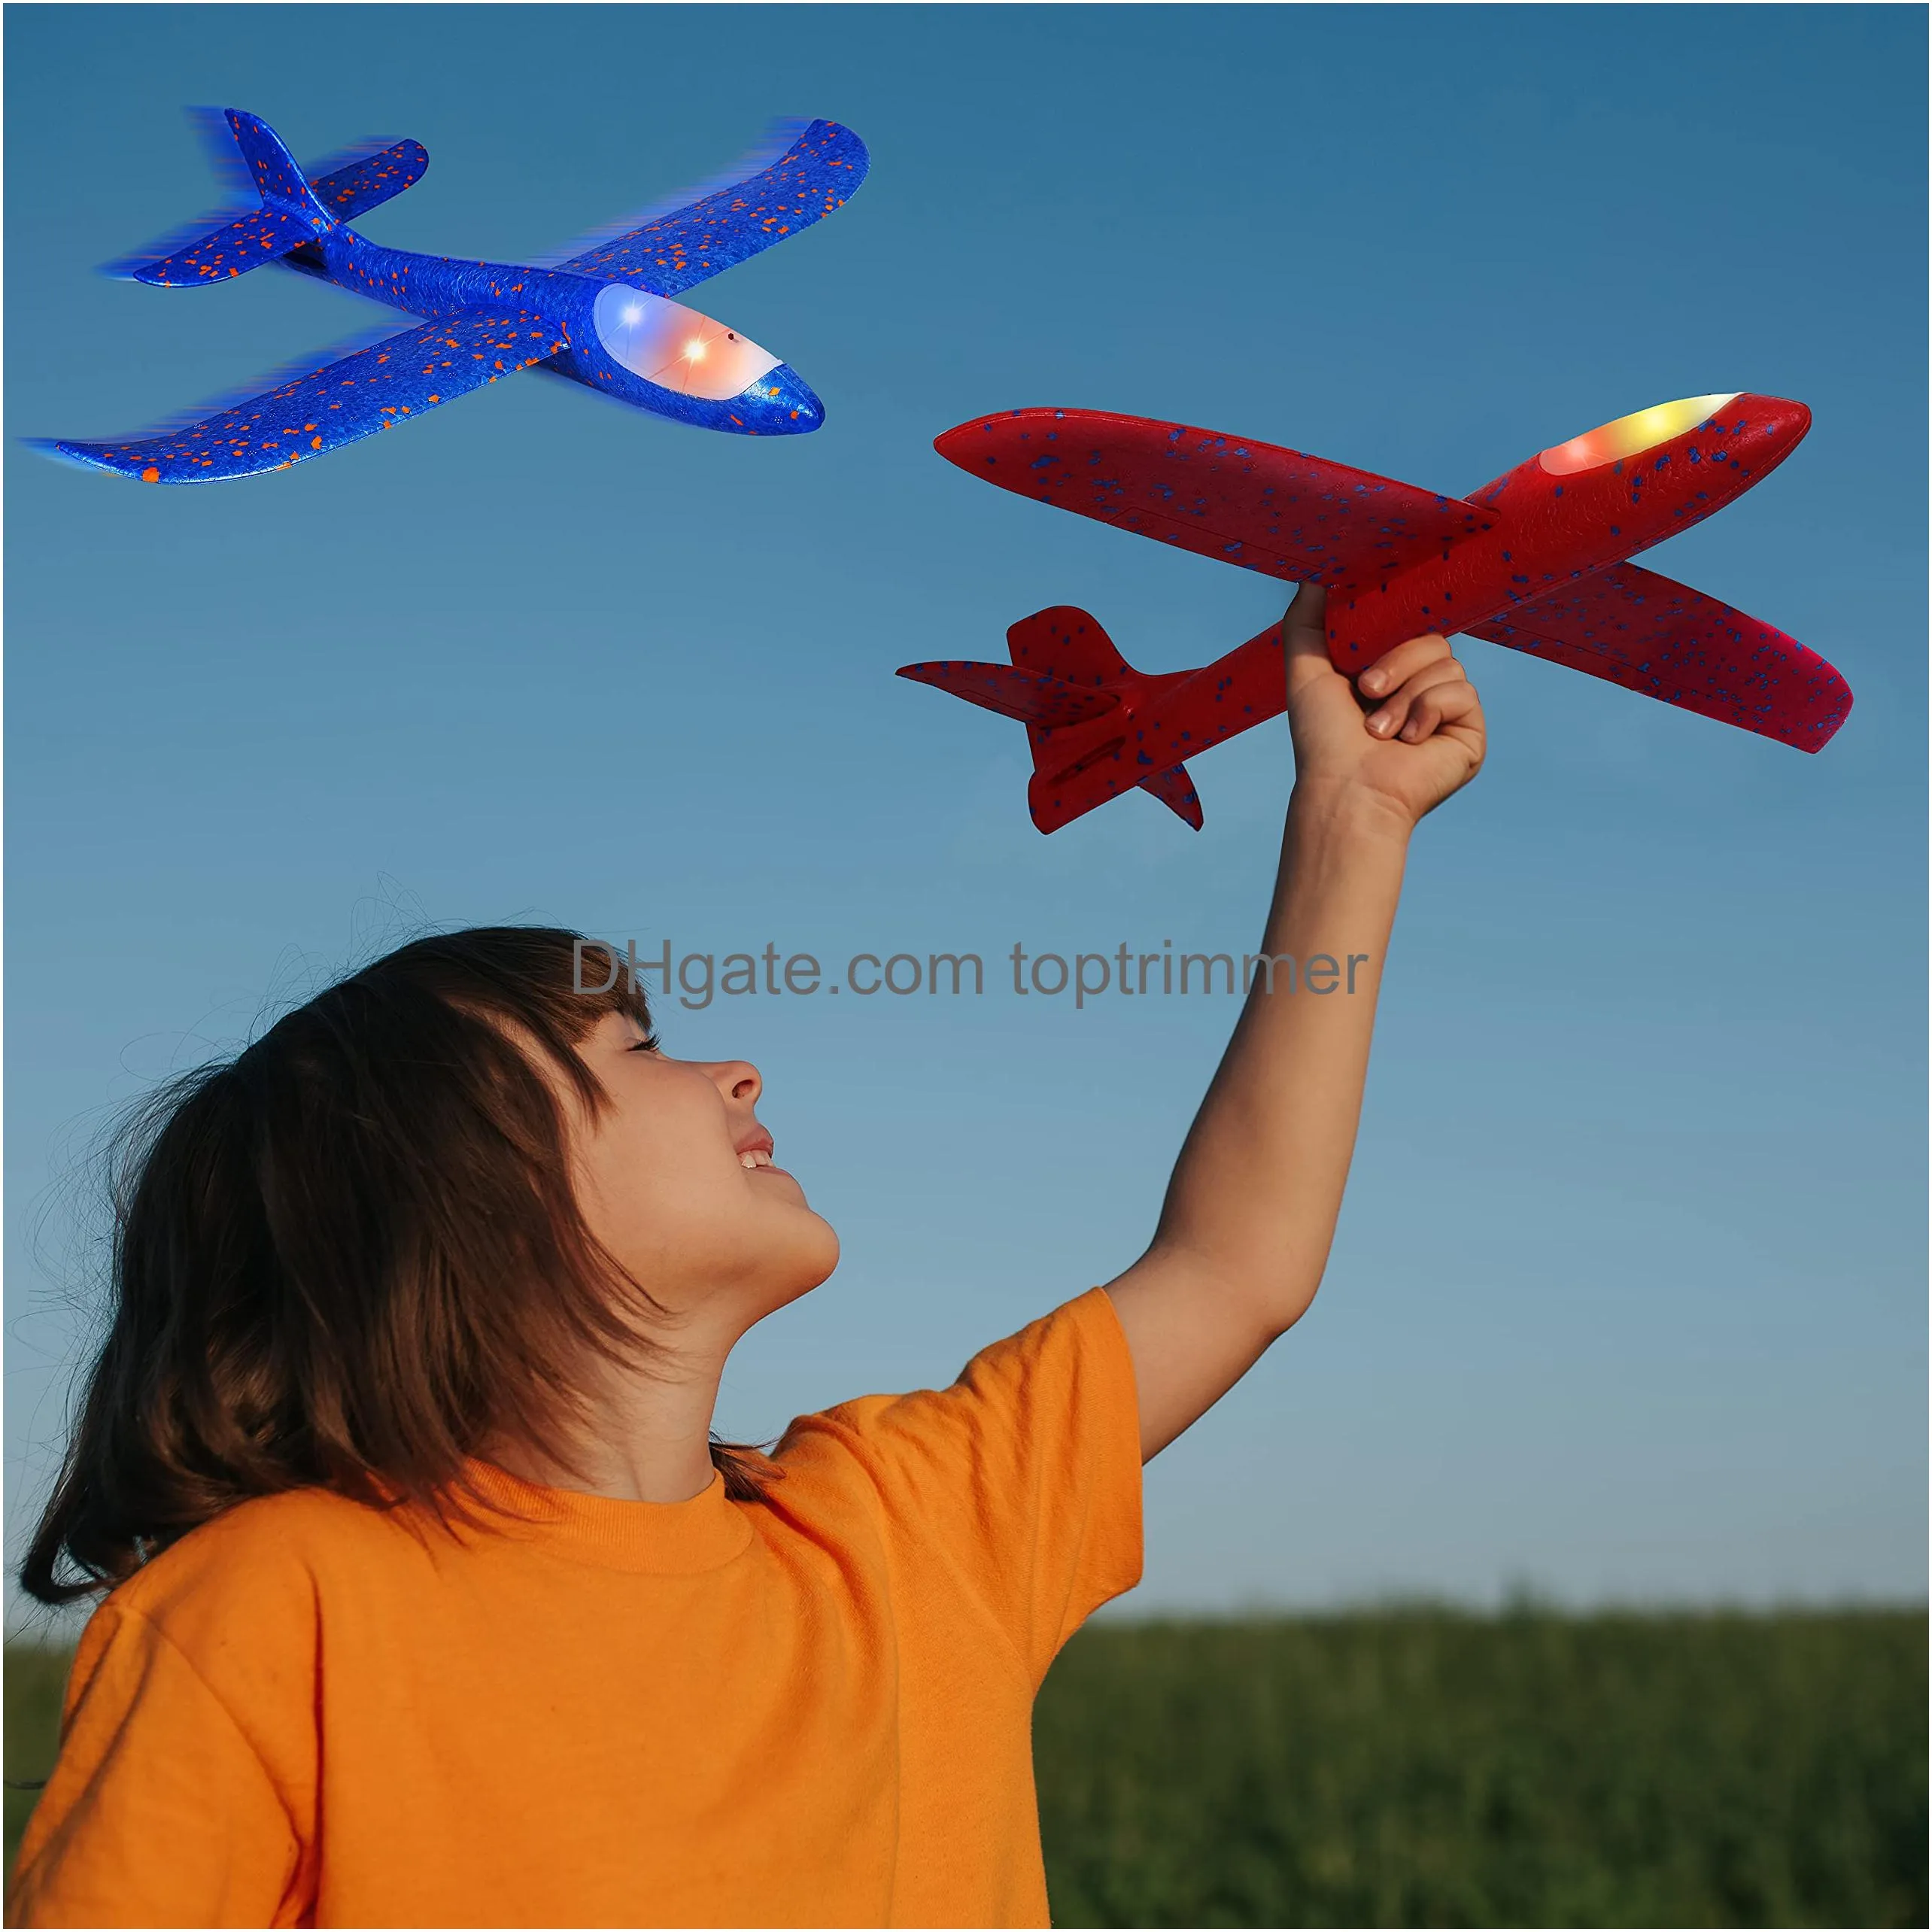 ijo led light airplane toys17.5 large throwing foam plane2 flight modes glider planeoutdoor flying toys for kidsflying toys gift for boys girls 3 4 5 6 7 8 9 years old